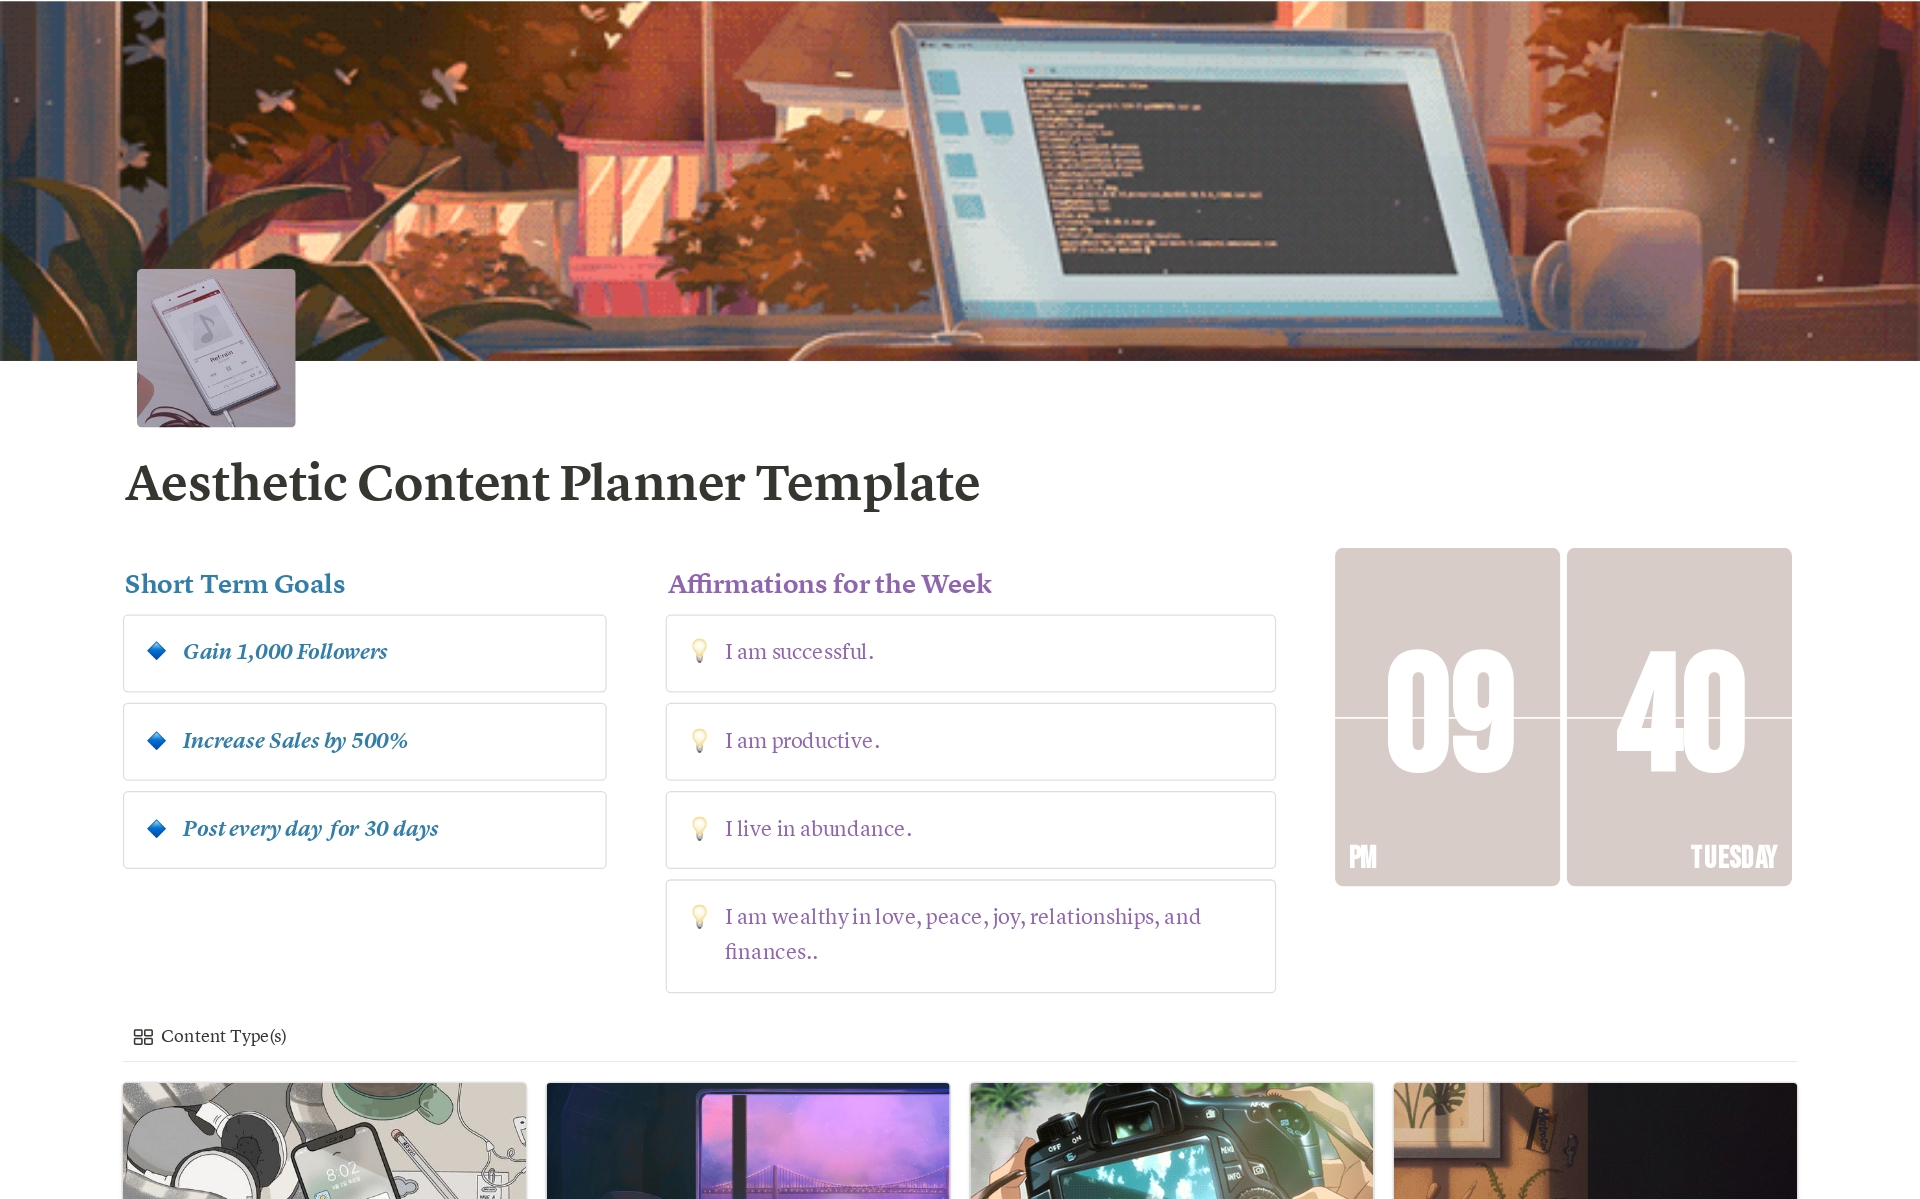 Aesthetic Content Planner:

Anime Style Aesthetic

Primary Gallery sorted by Content Type.

A Notion Calendar embed to easily add and track your content schedule It also features a

Continual update of useful resources and advice for social media.

Weekly Affirmations

